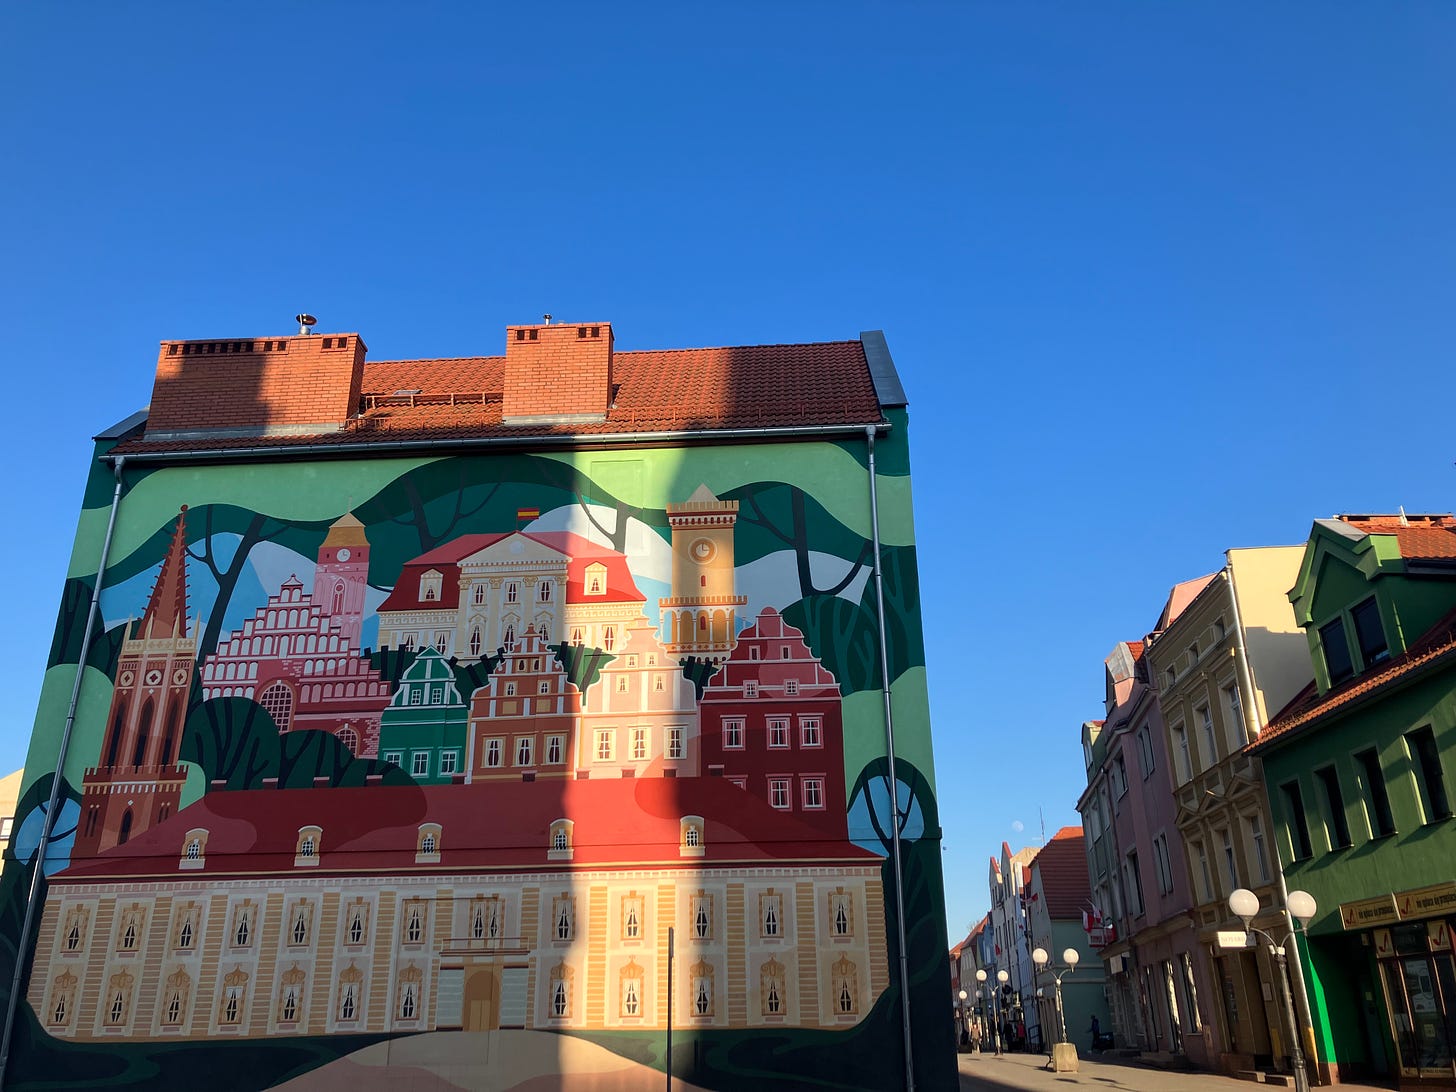 A colourful mural of Zagan on a building in Zagan on a sunny day.